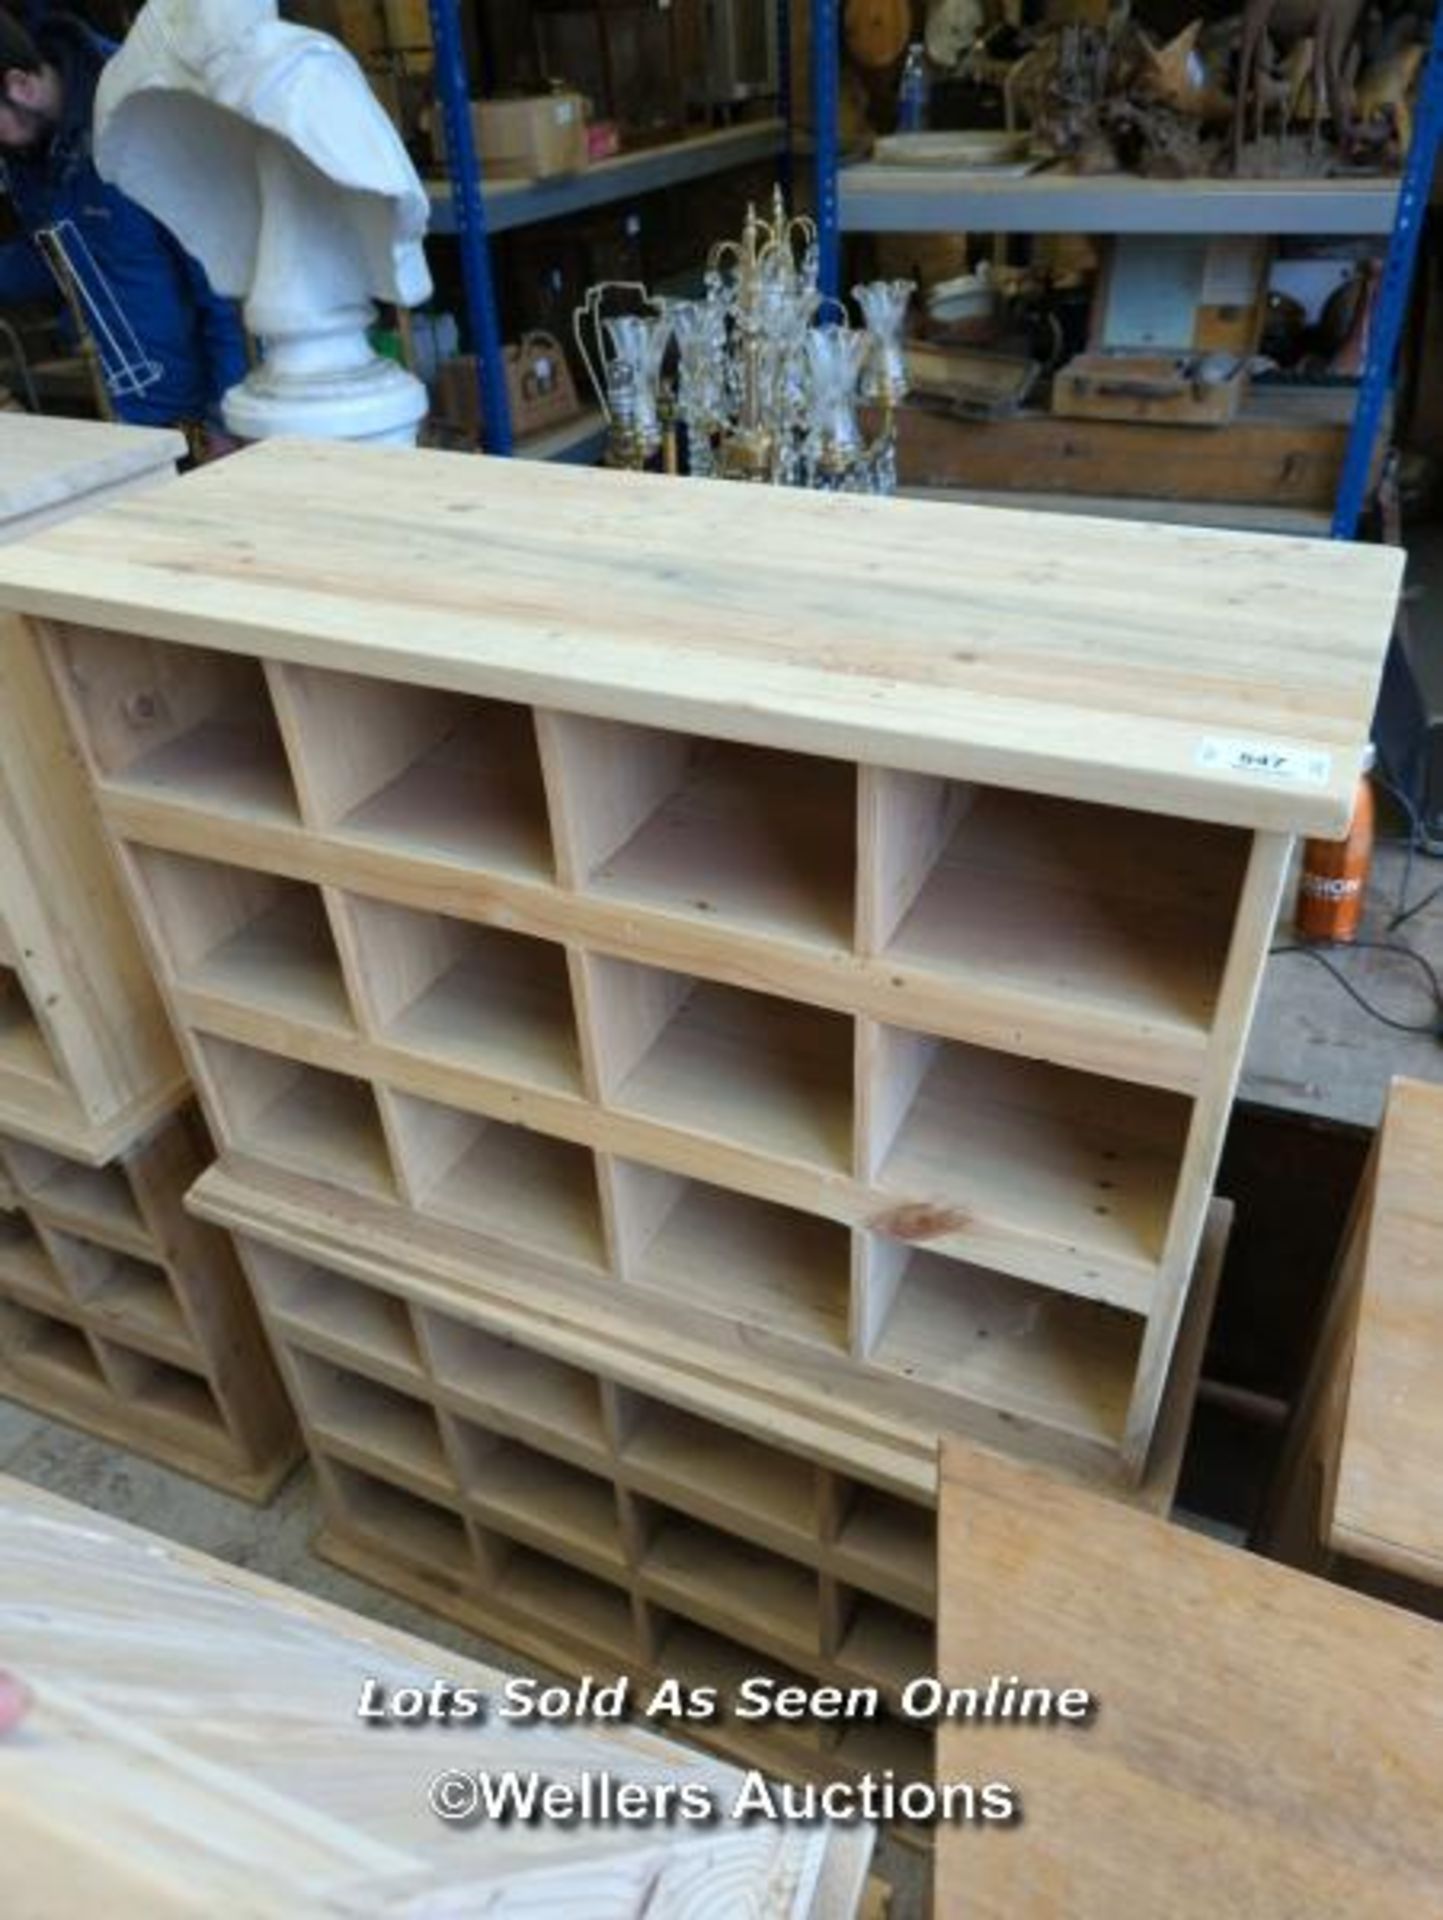 *PAIR OF PINE STORAGE SHELVES WITH TWELVE COMPARTMENTS, 26 HIGH X 38 WIDE X 15 DEEP / ALL LOTS ARE